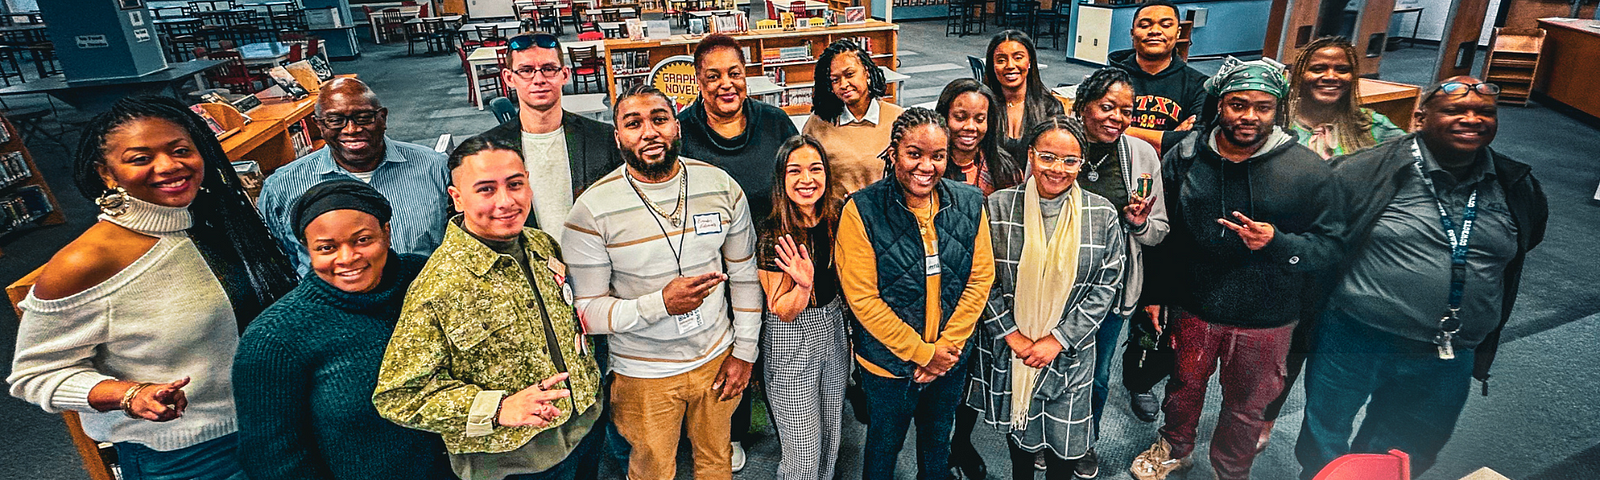 Group photo of SJIEP reporting fellowship participants at their 2024 kickoff event. The diverse team is smiling broadly, standing in a library with bookshelves in the background. They are informally arrayed in two rows, with some seated, showing a mix of casual and business attire, reflecting a vibrant and collaborative atmosphere.